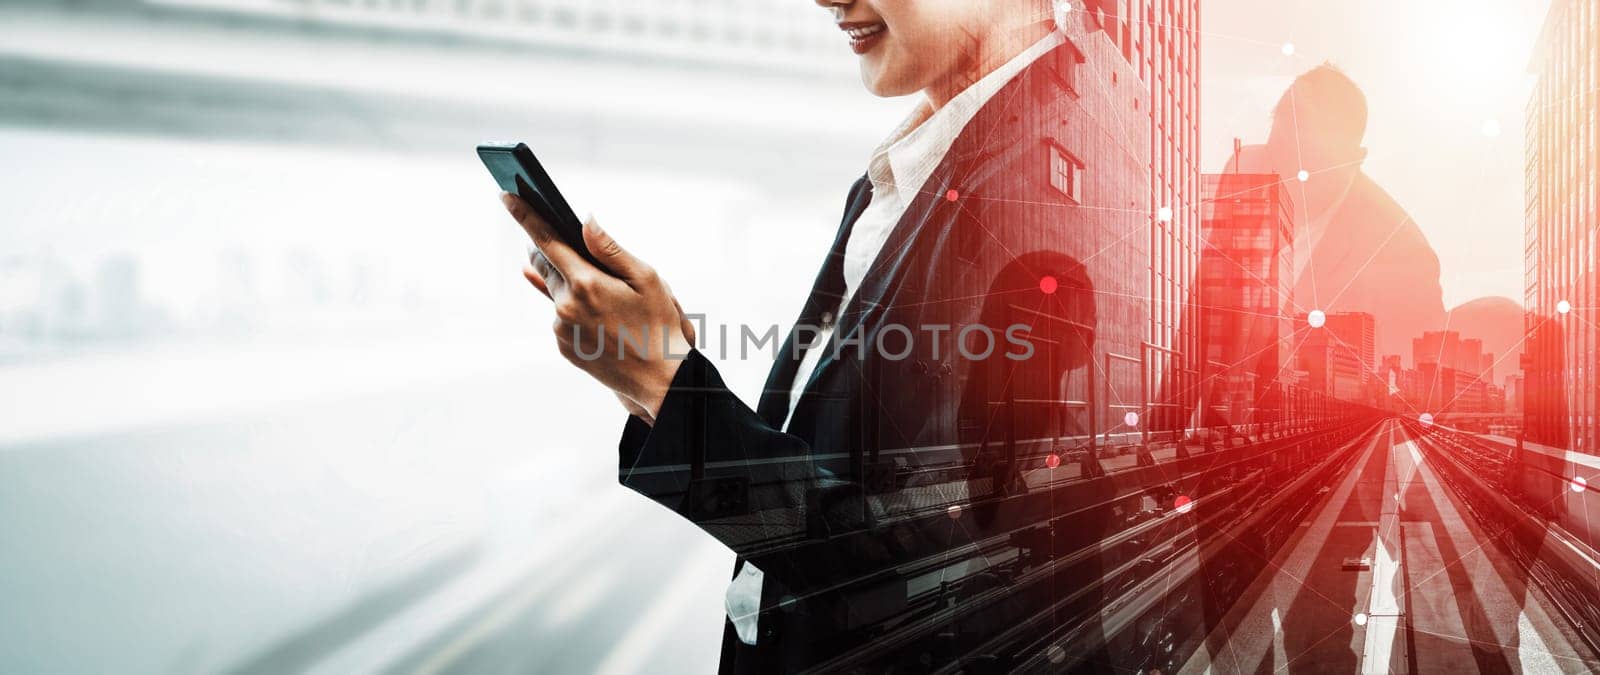 Double Exposure Image of Business Communication uds by biancoblue